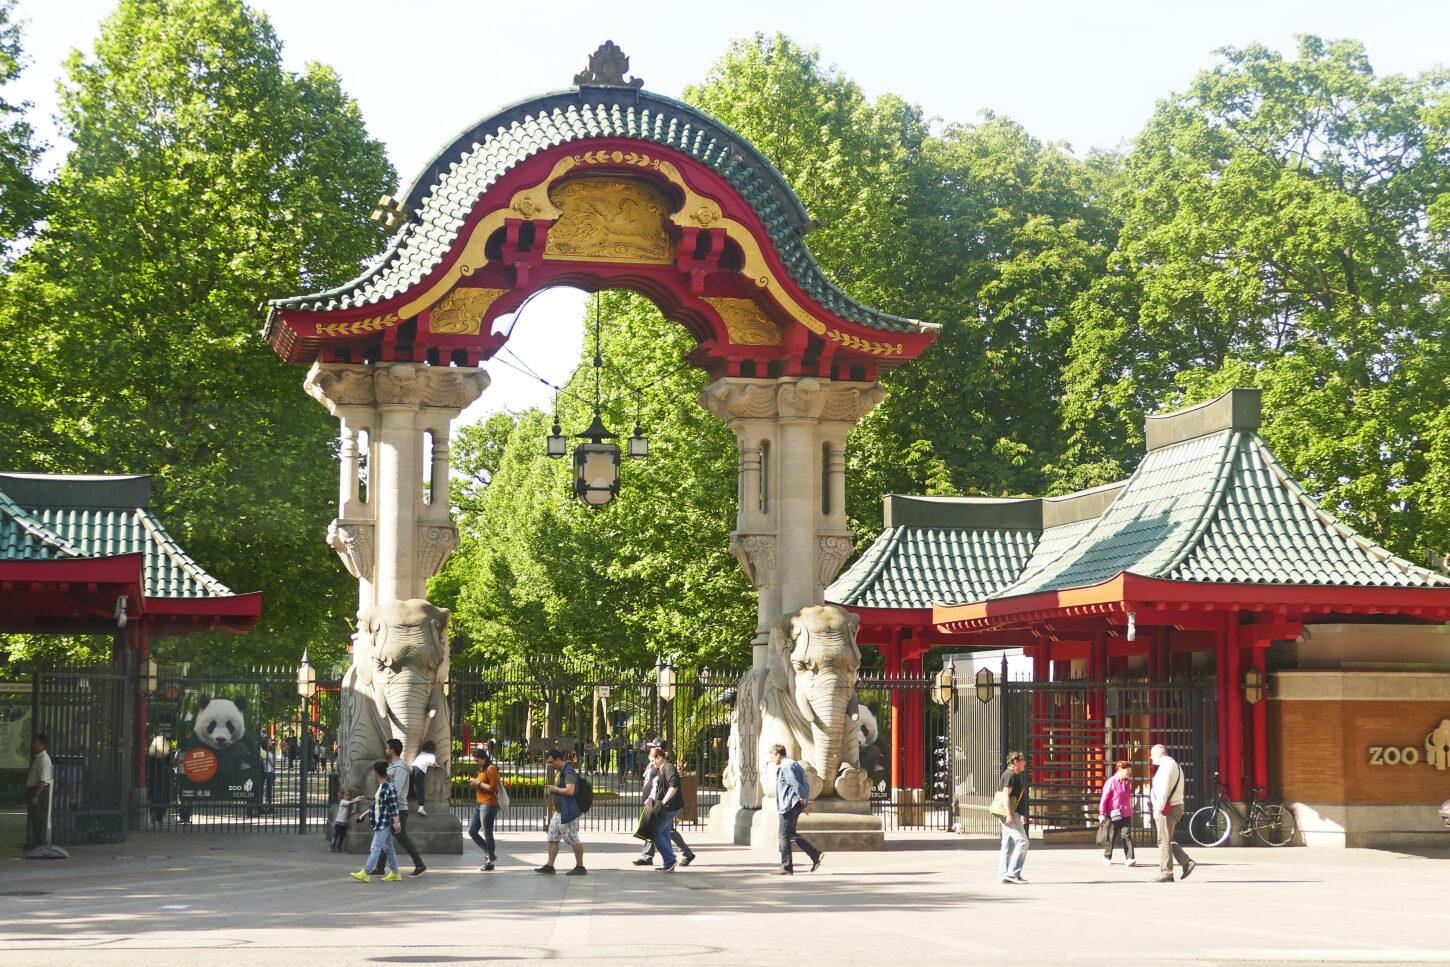 Entrance to Berlin Zoo, with a red archway and leafy green trees